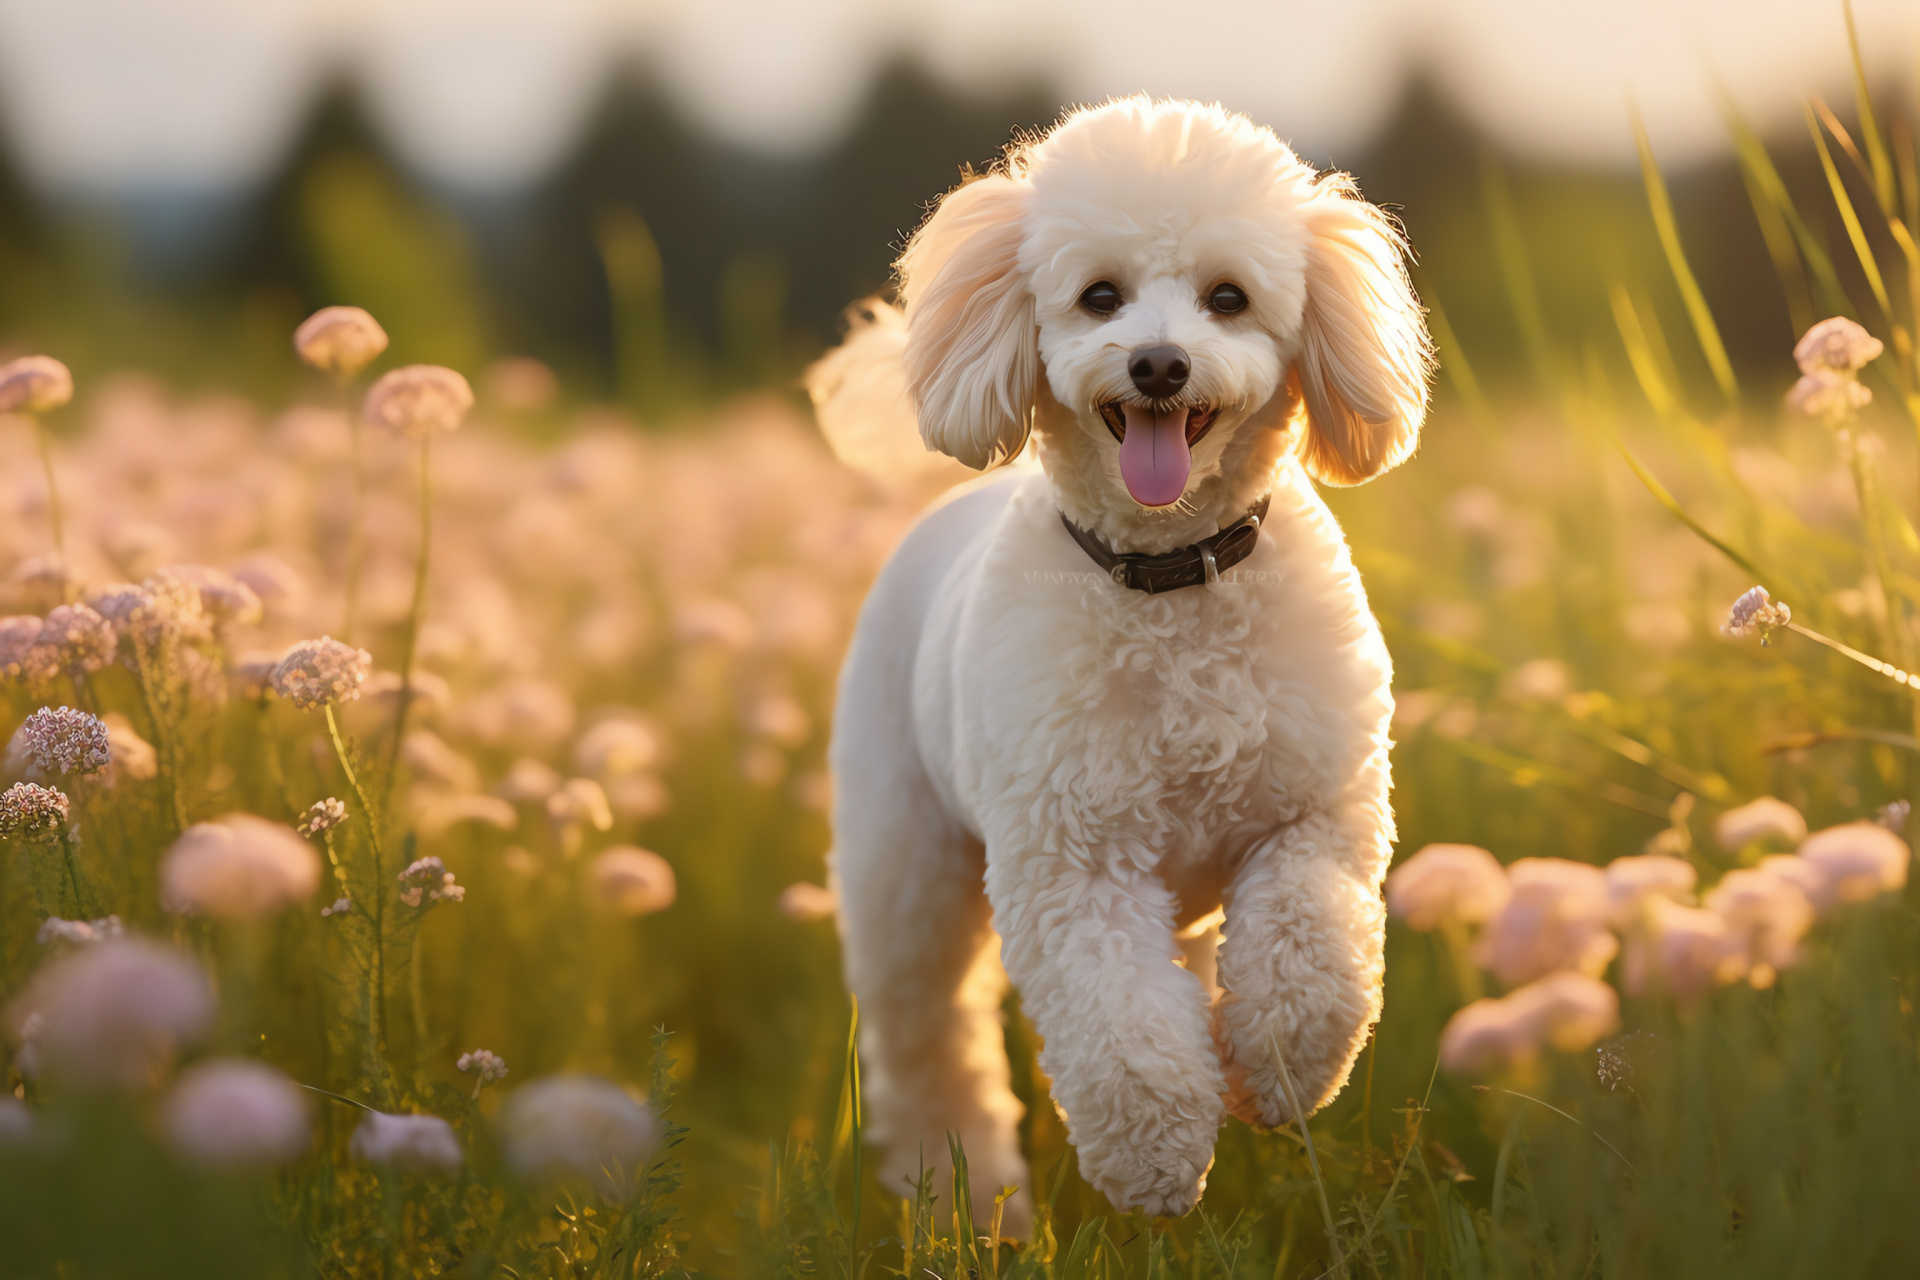 Poodle breed, canine brown sight, cream pet fur, canine curly fur, serene outdoor activity, HD Desktop Wallpaper